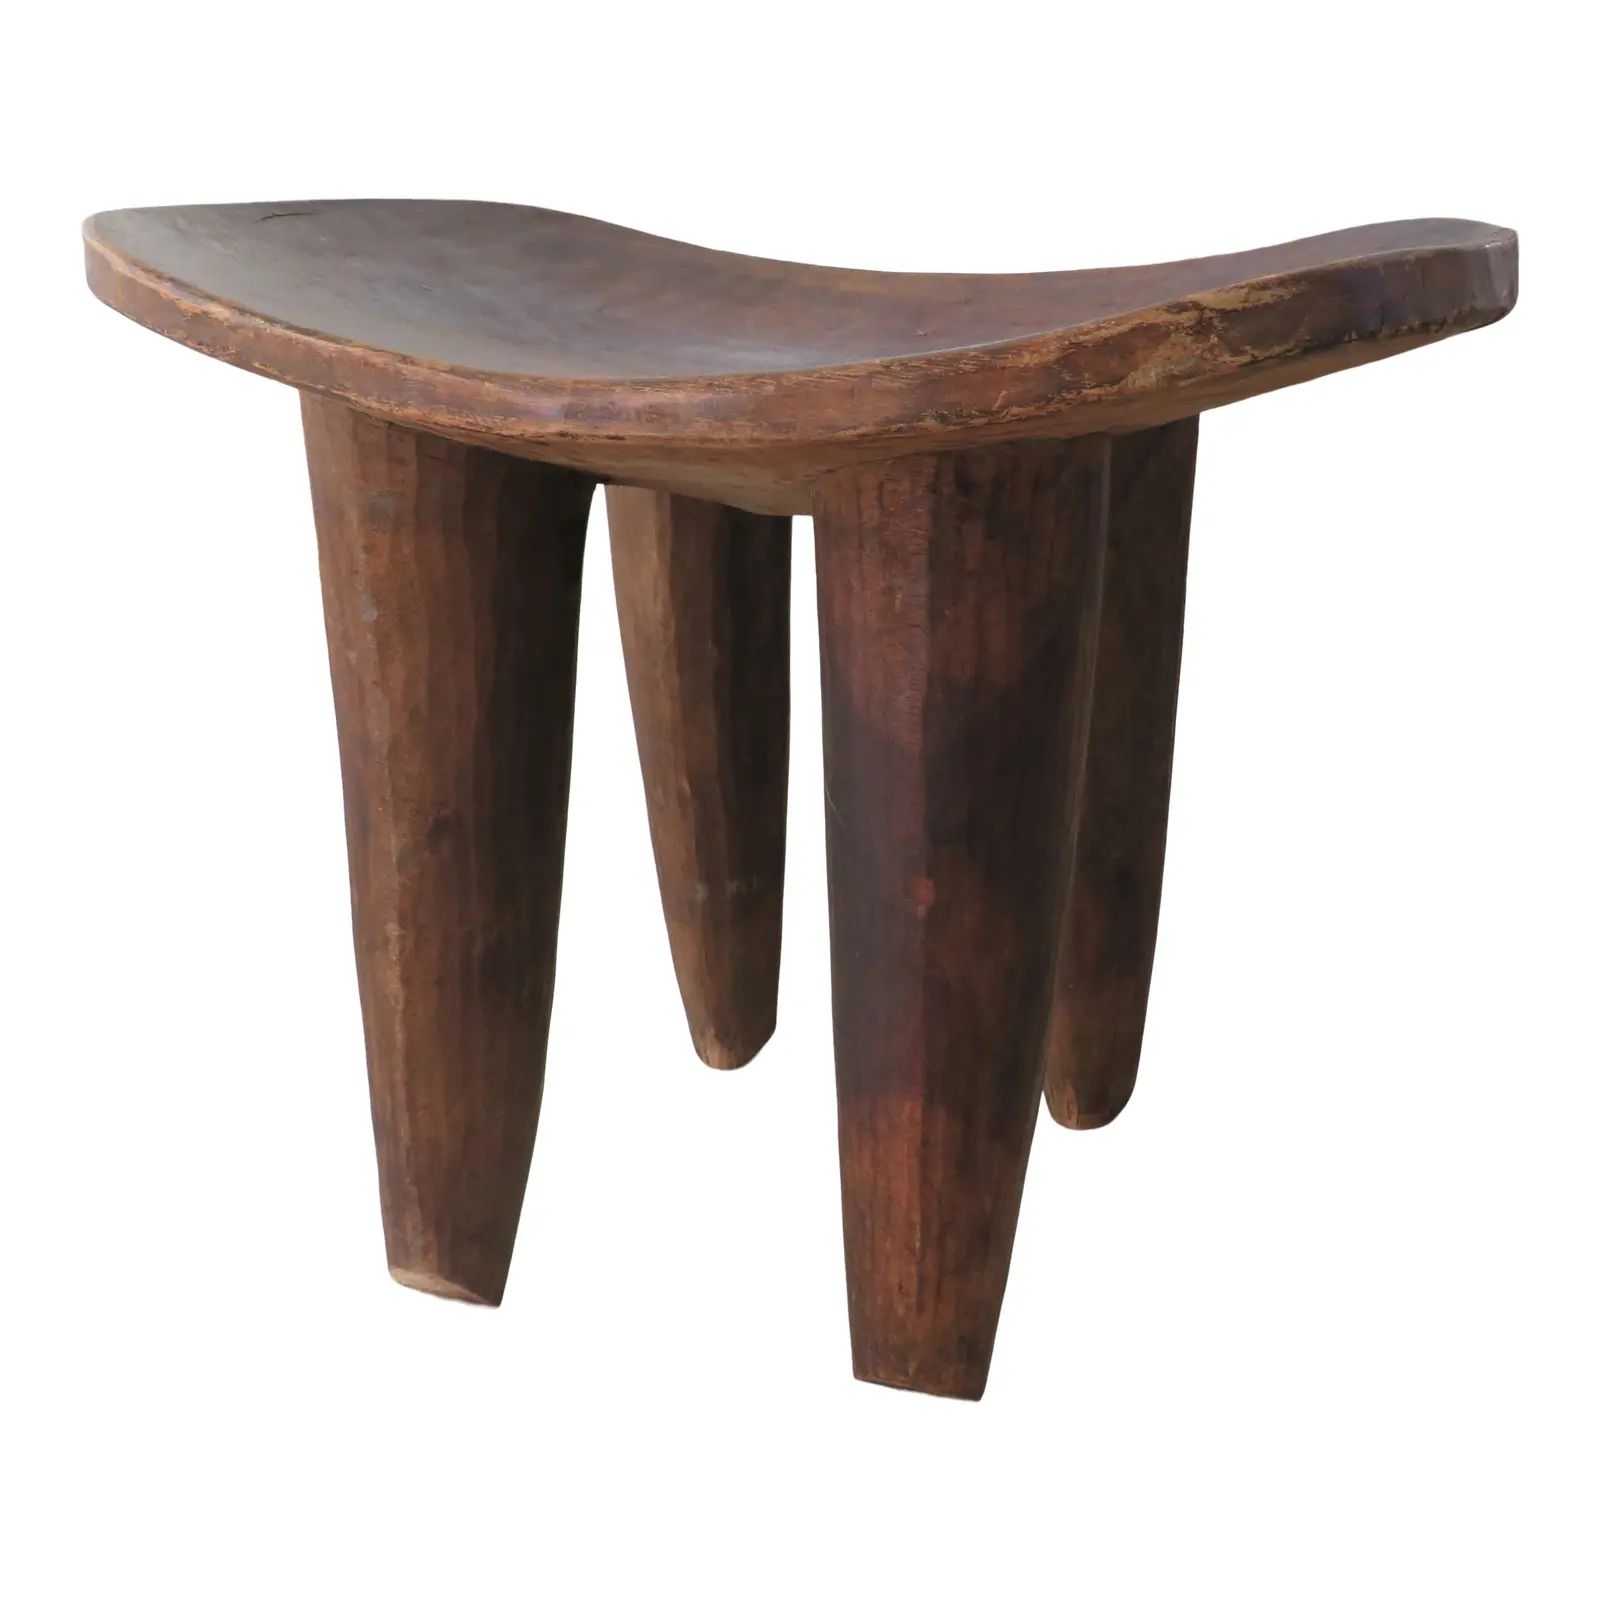 Mid-Century Organic Modern African Senufo Stool / Primitive Side Table From Cote d'Ivoire | Chairish